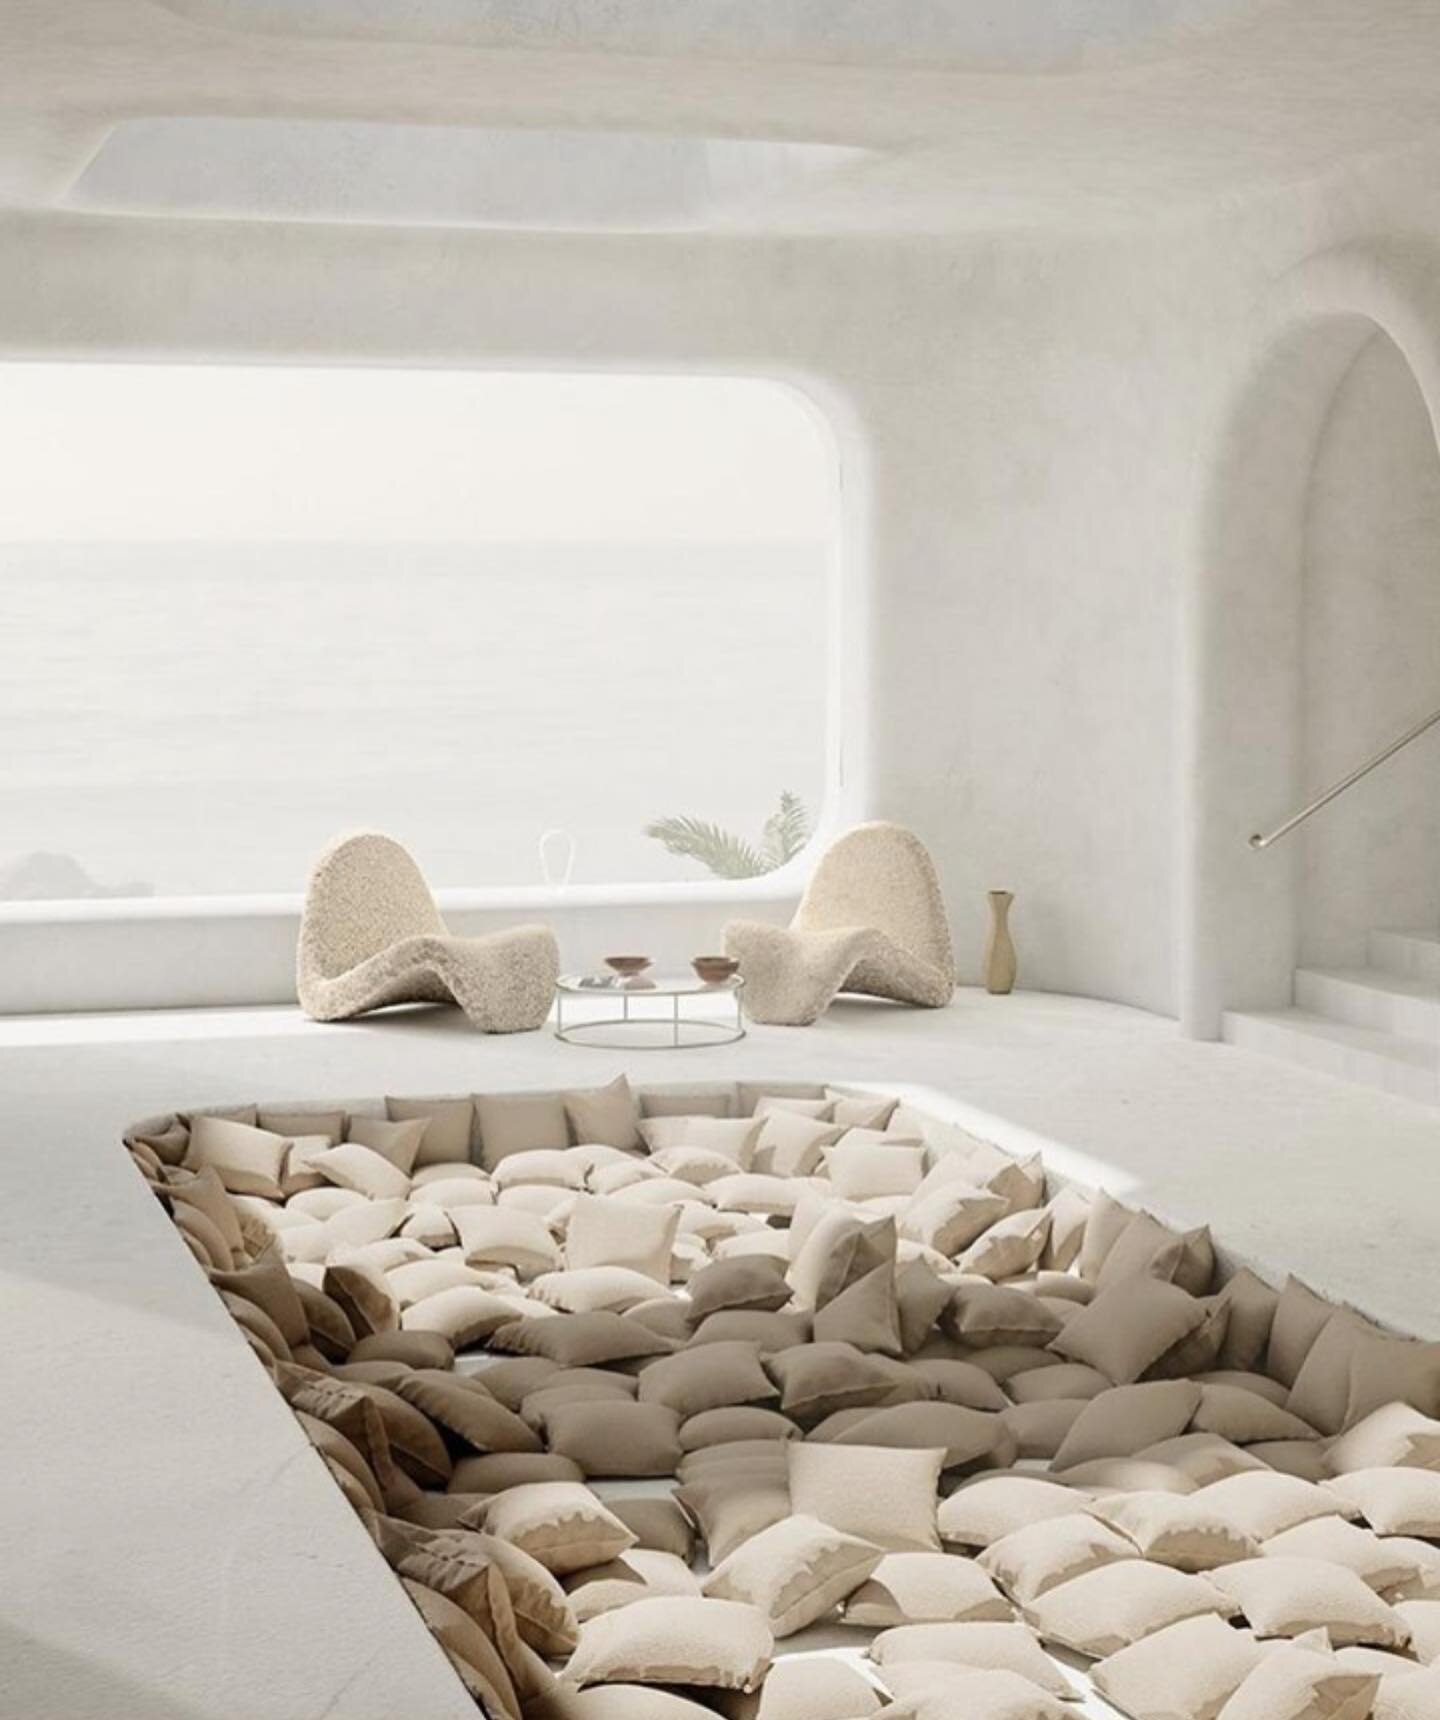 TGIF!🤍 If only I could spend my weekend in a a sunken pit of pillows☁️ Instead I will be chasing around a toddler. What do your weekend plans look like? And happy Friday!

#interiors #sunkenlivingroom #pillowpit #creaminteriors #tgif #interiordesign